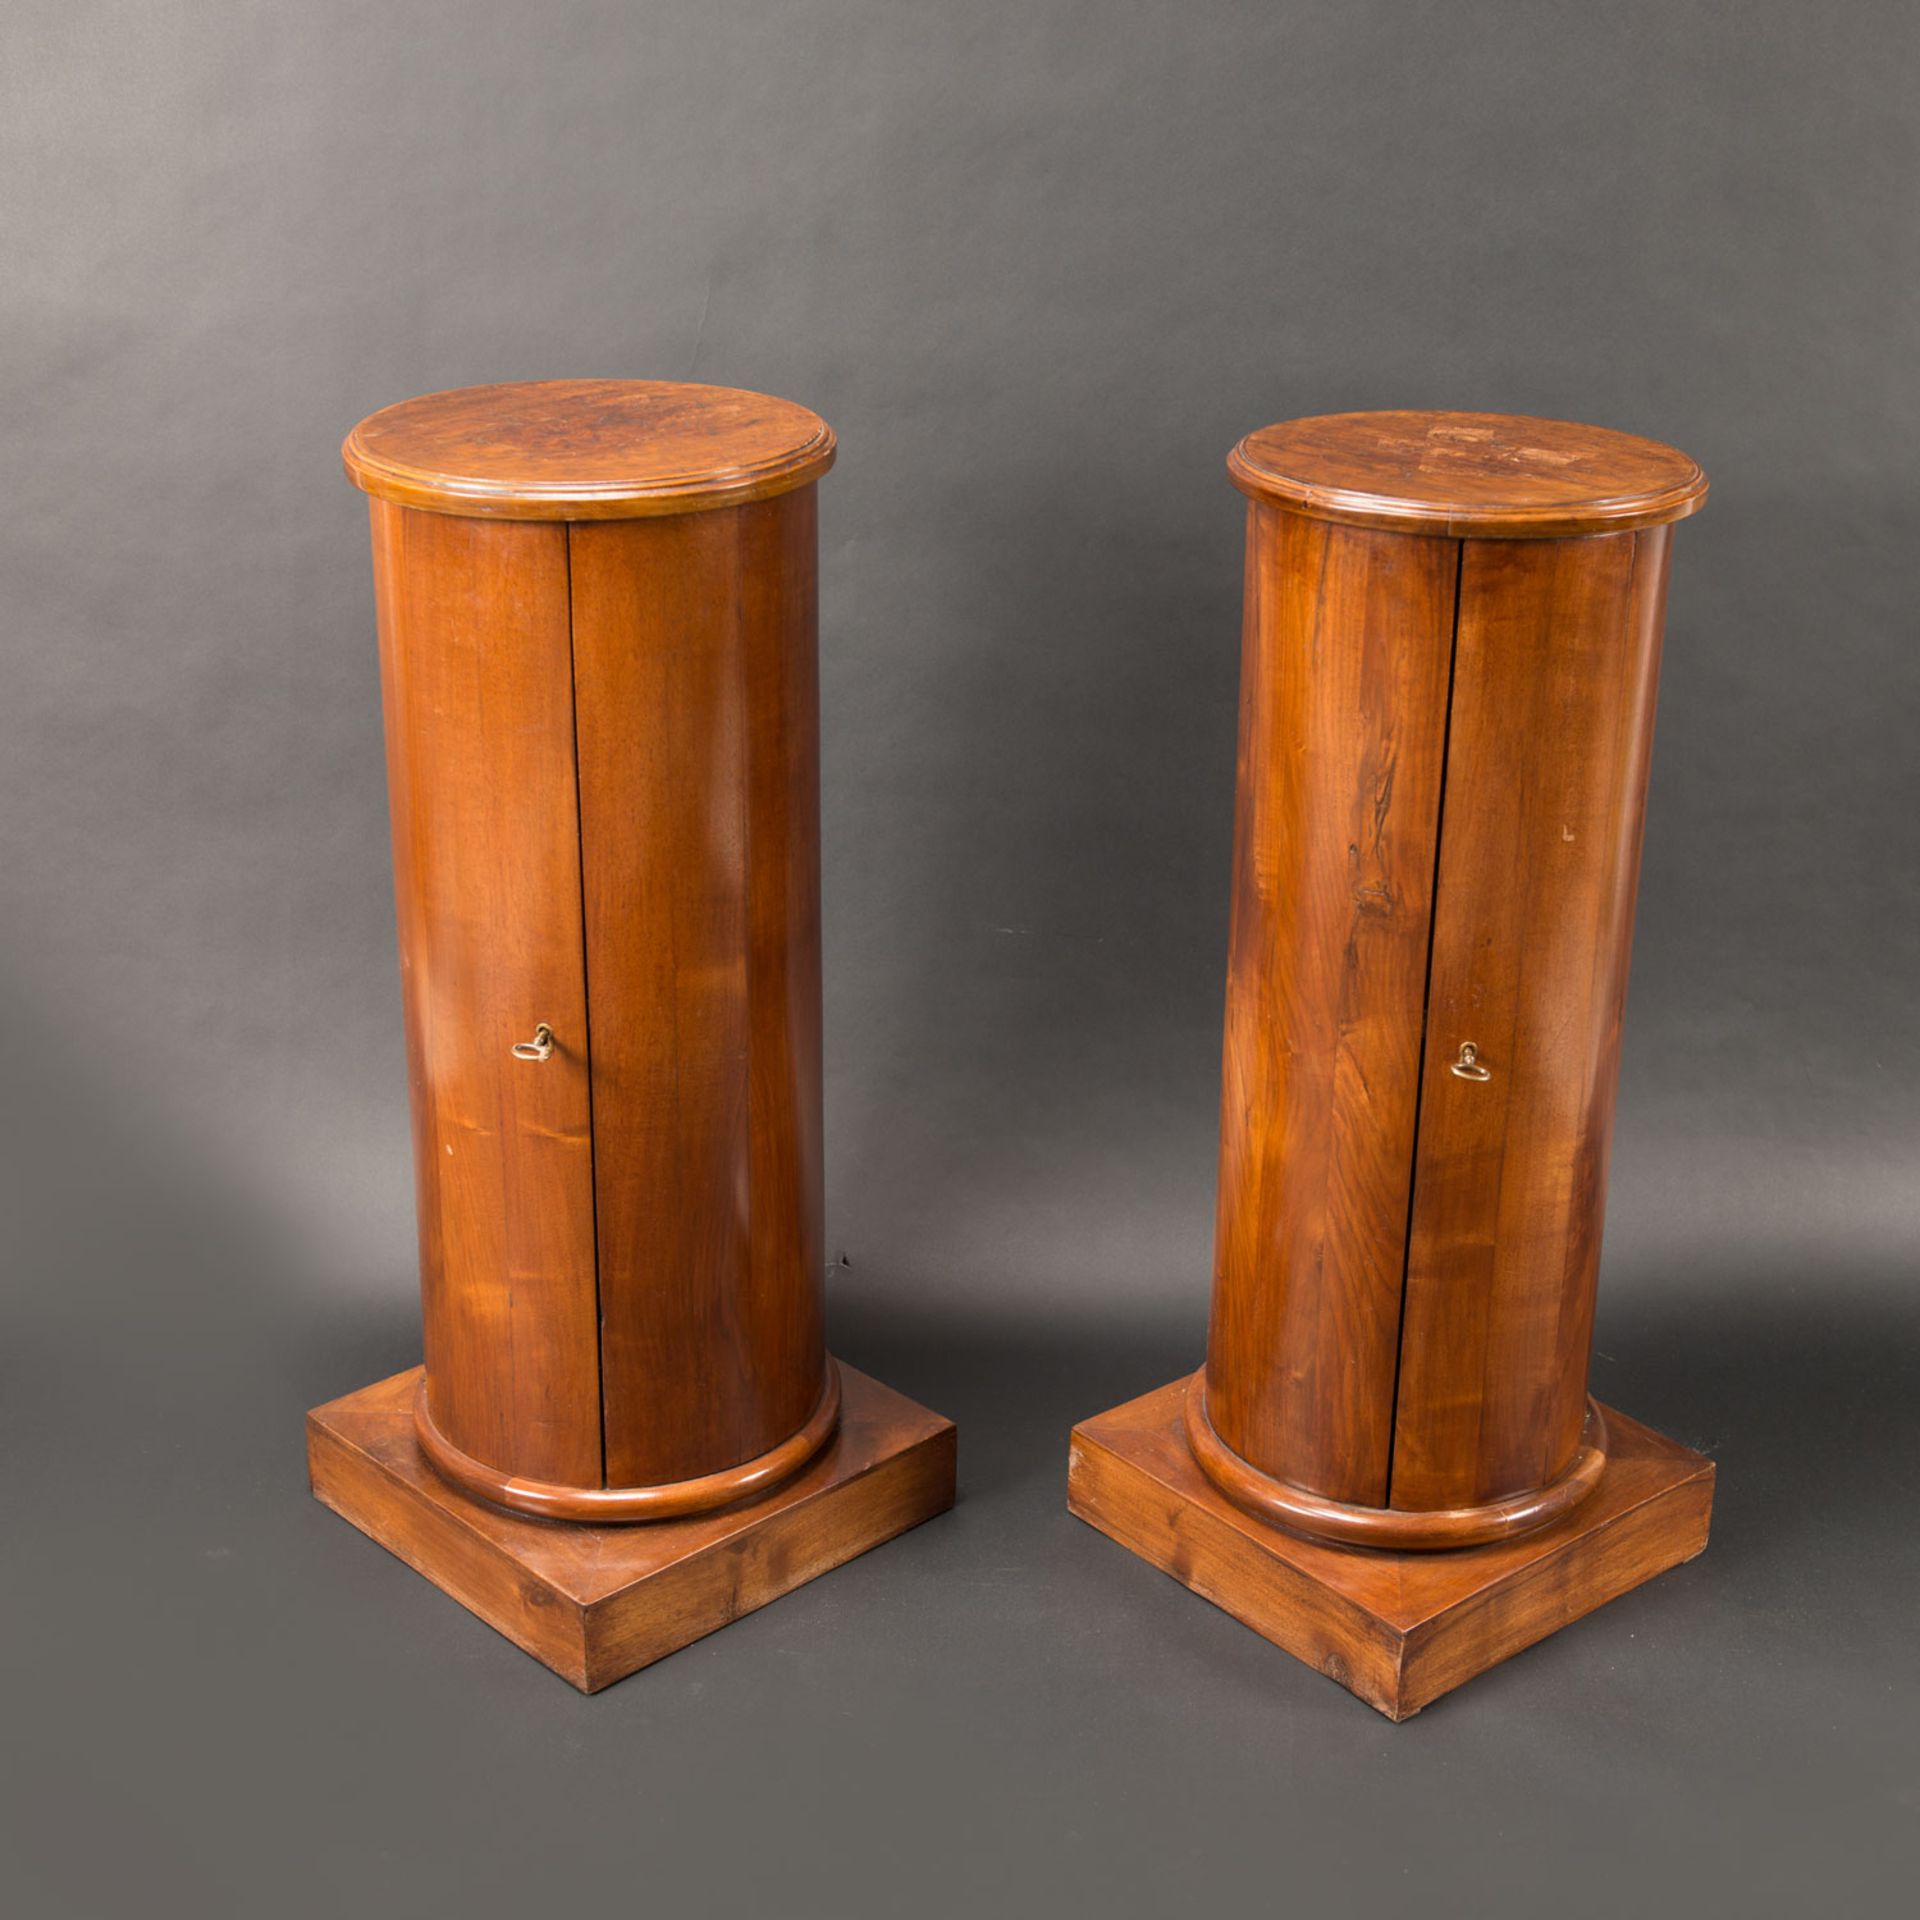 Pair of column chests